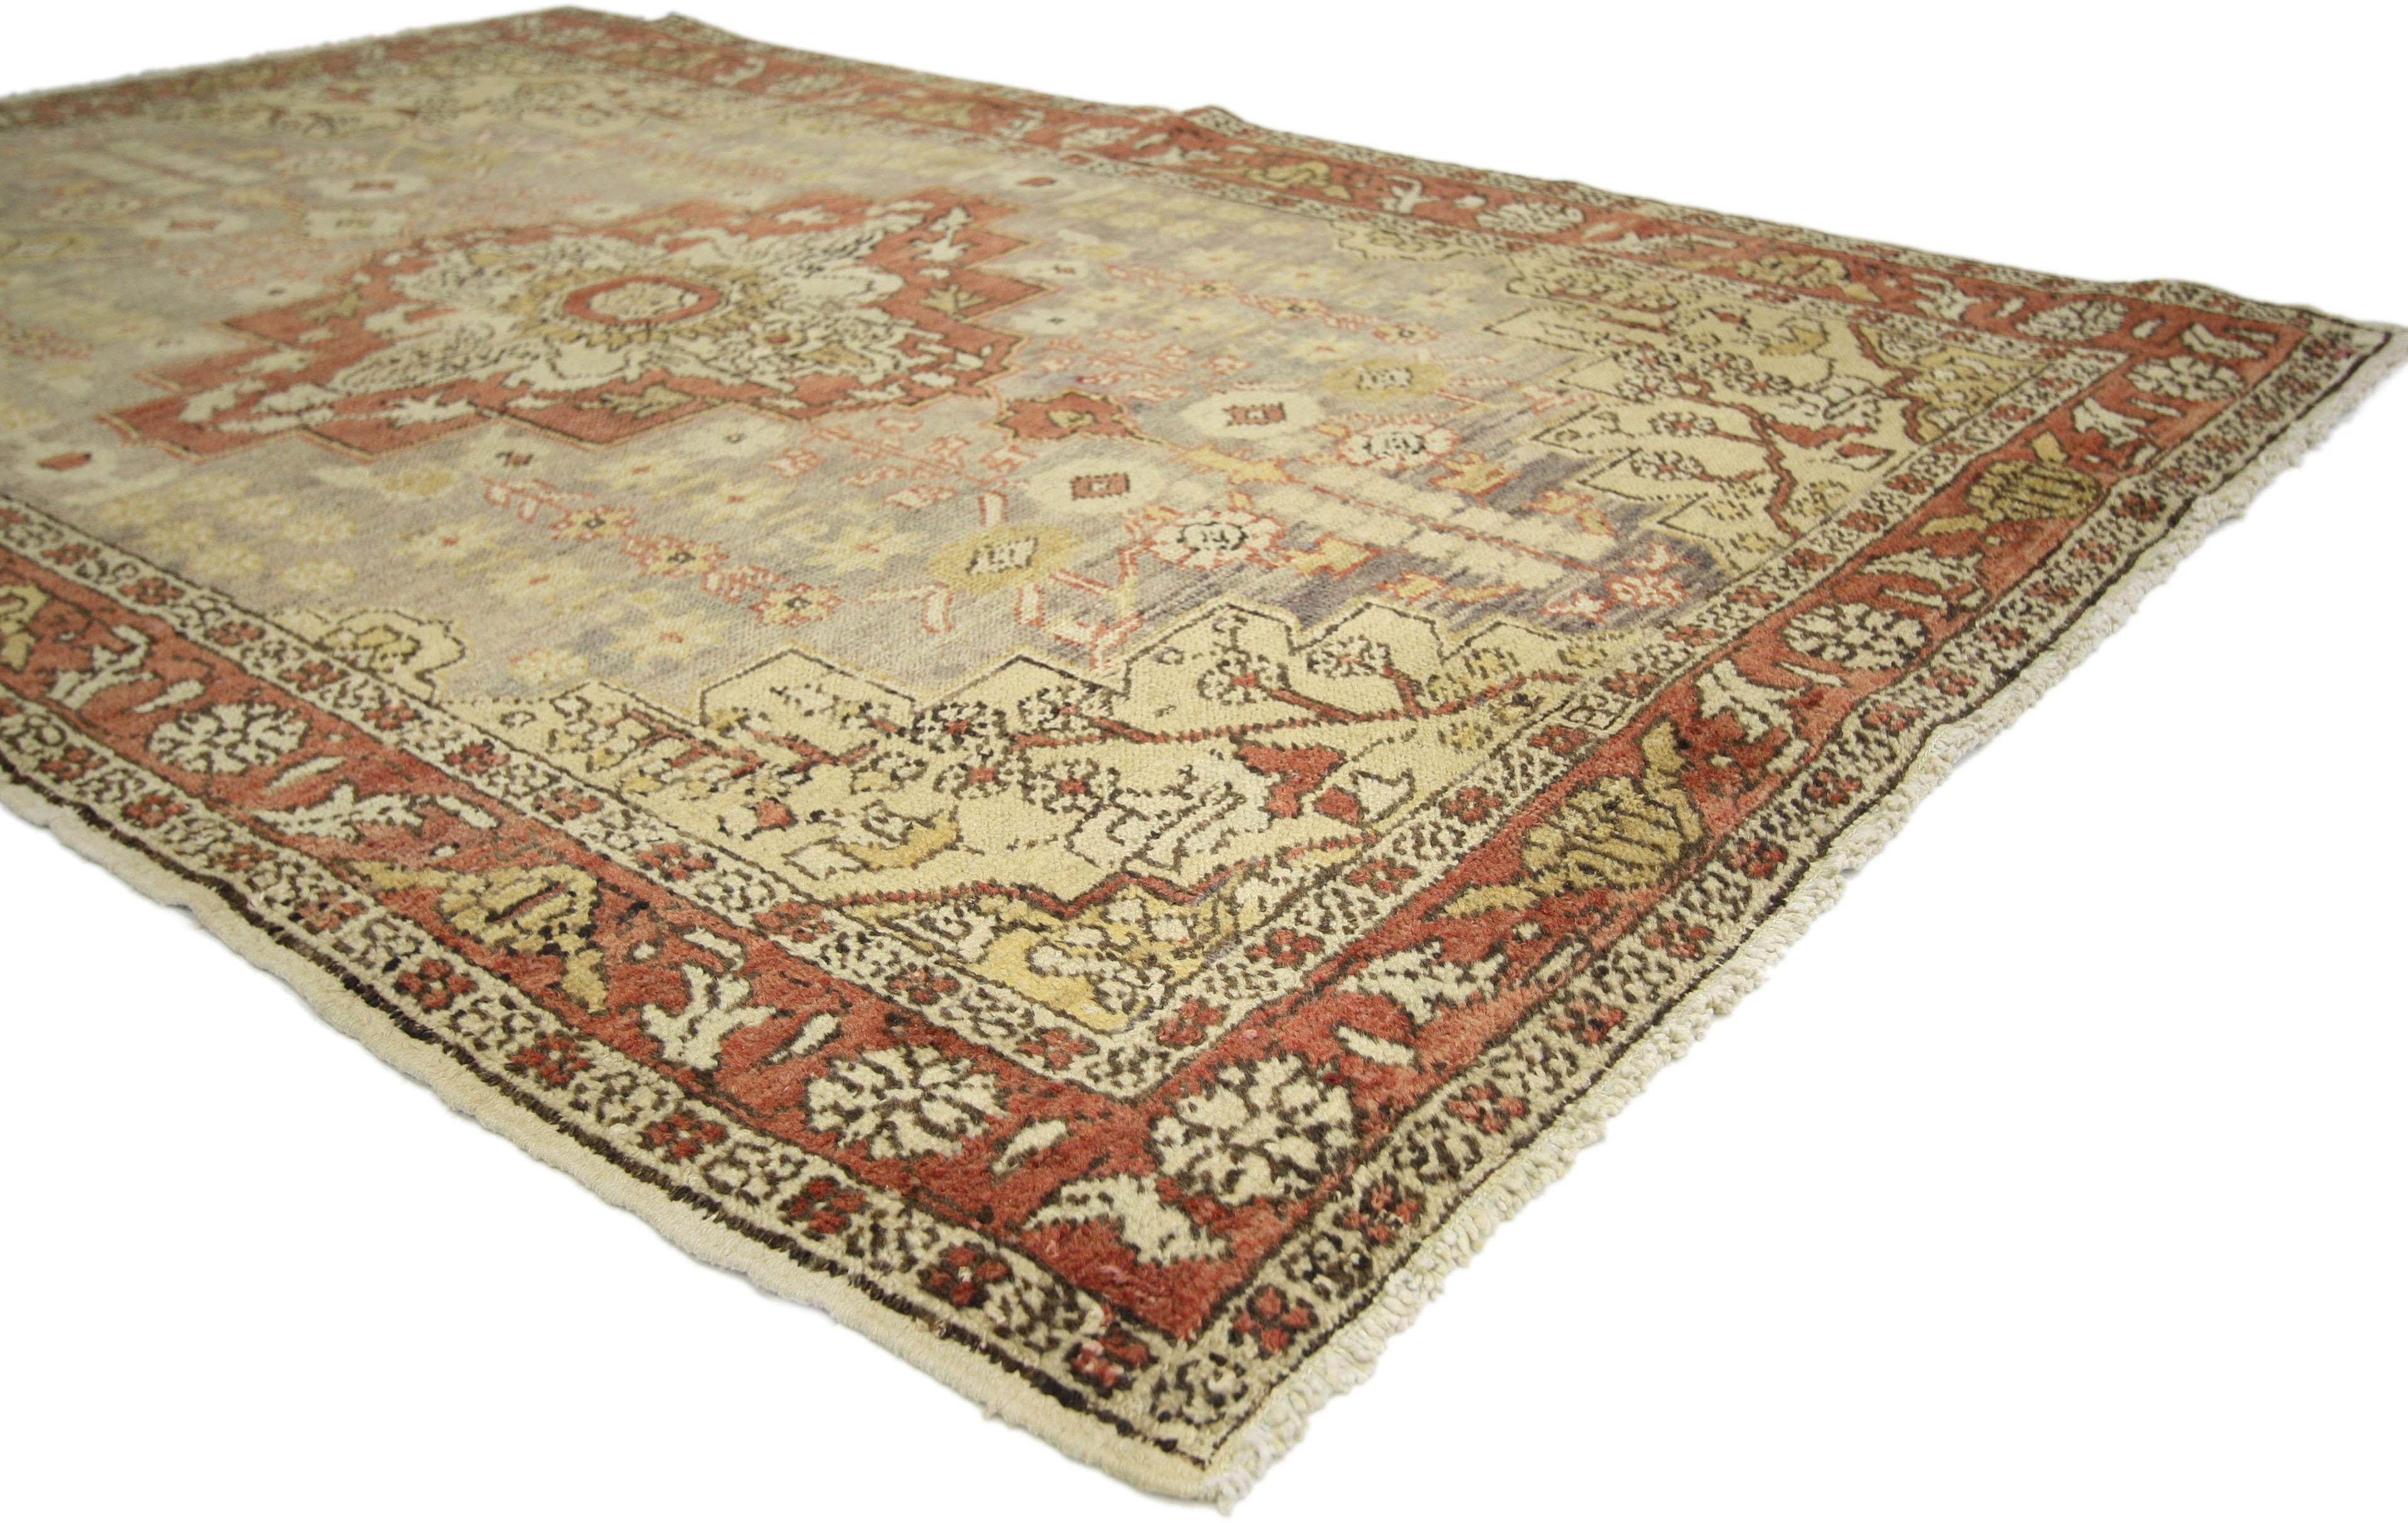 Modern Rustic Style Vintage Turkish Sivas Accent Rug, Entry or Foyer Rug In Good Condition For Sale In Dallas, TX